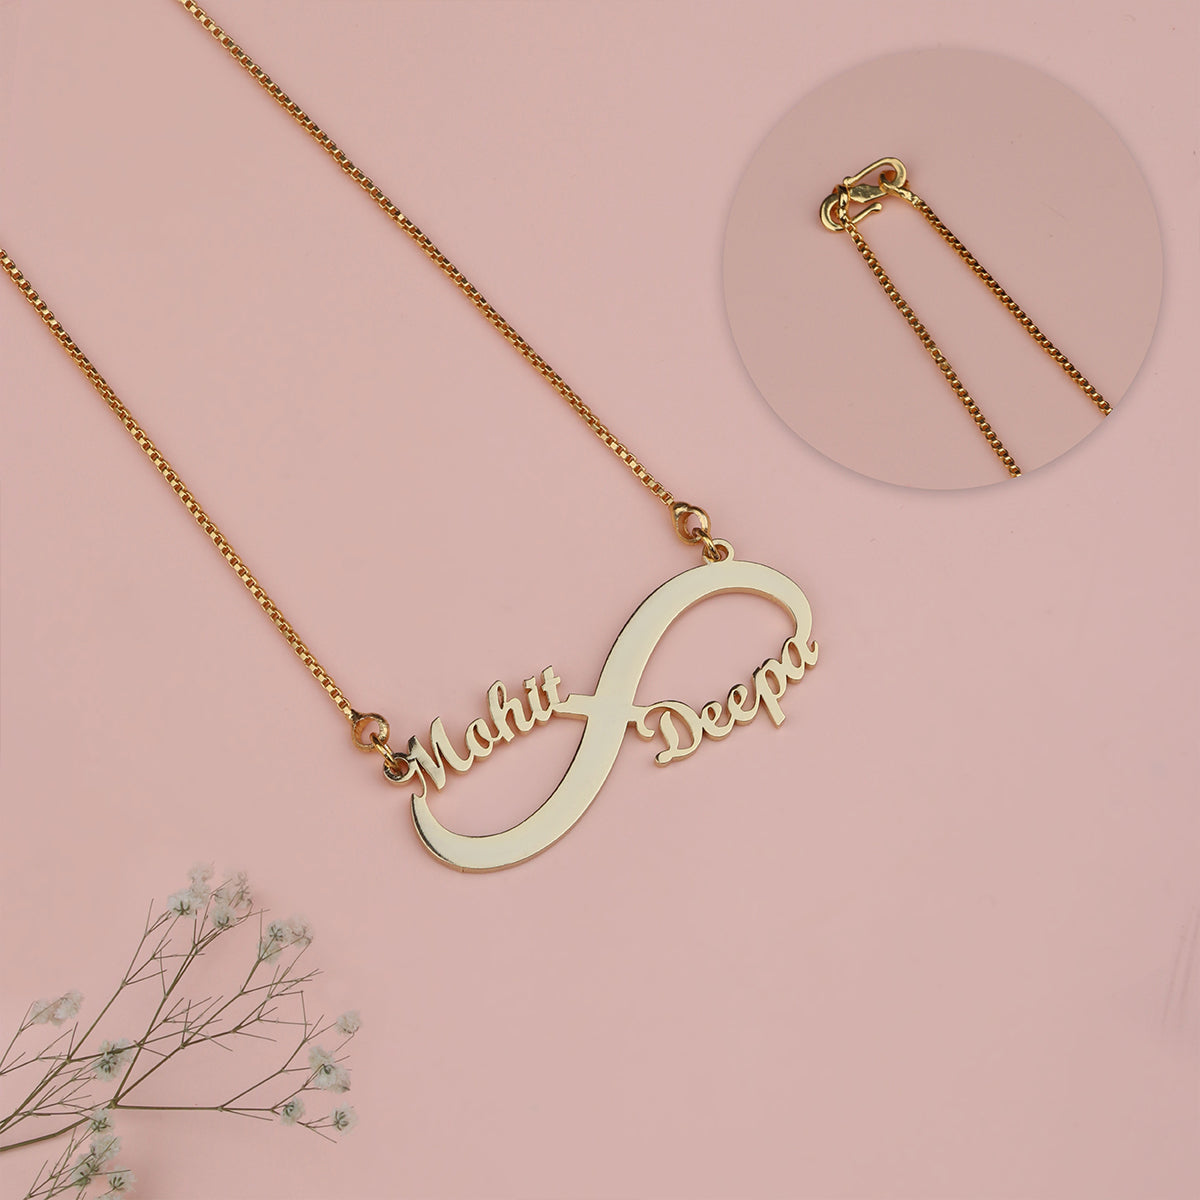 Dual Name Infinity Love Necklace